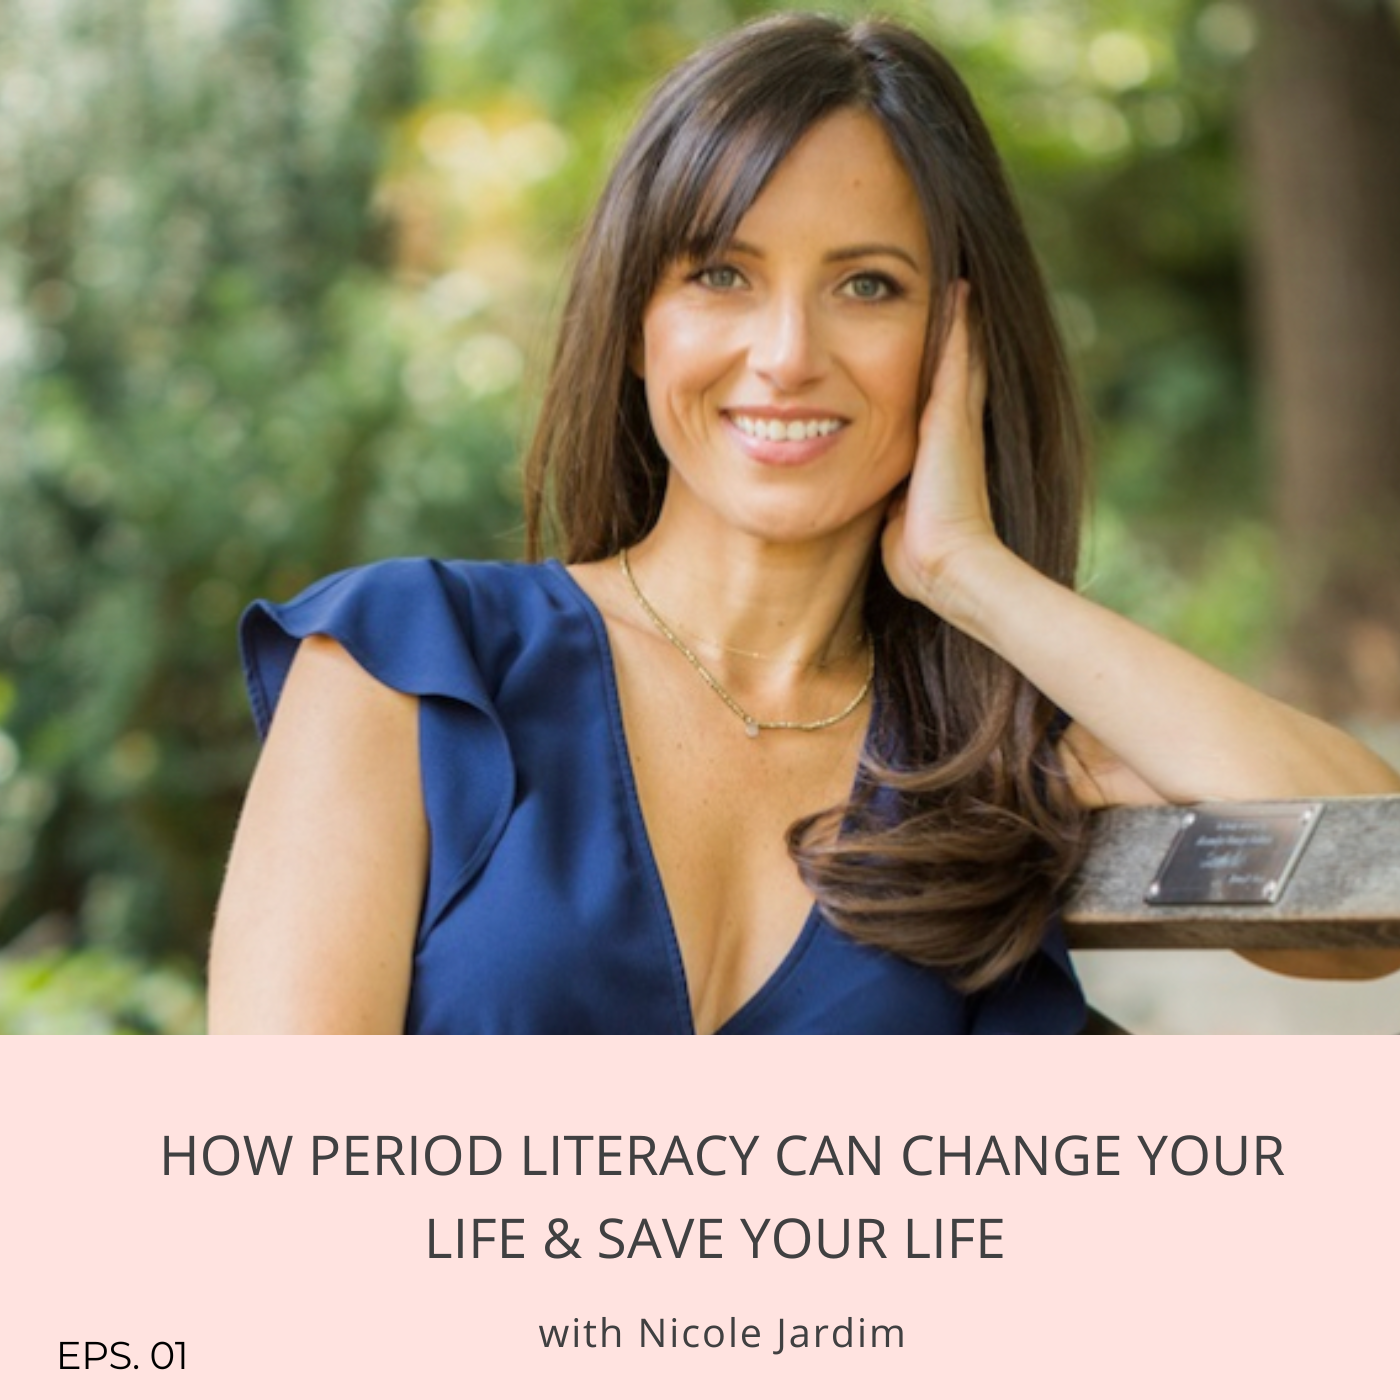 Episode 1: How Period Literacy Can Change your Life & Save Your Life with Nicole Jardim, author of Fix Your Period